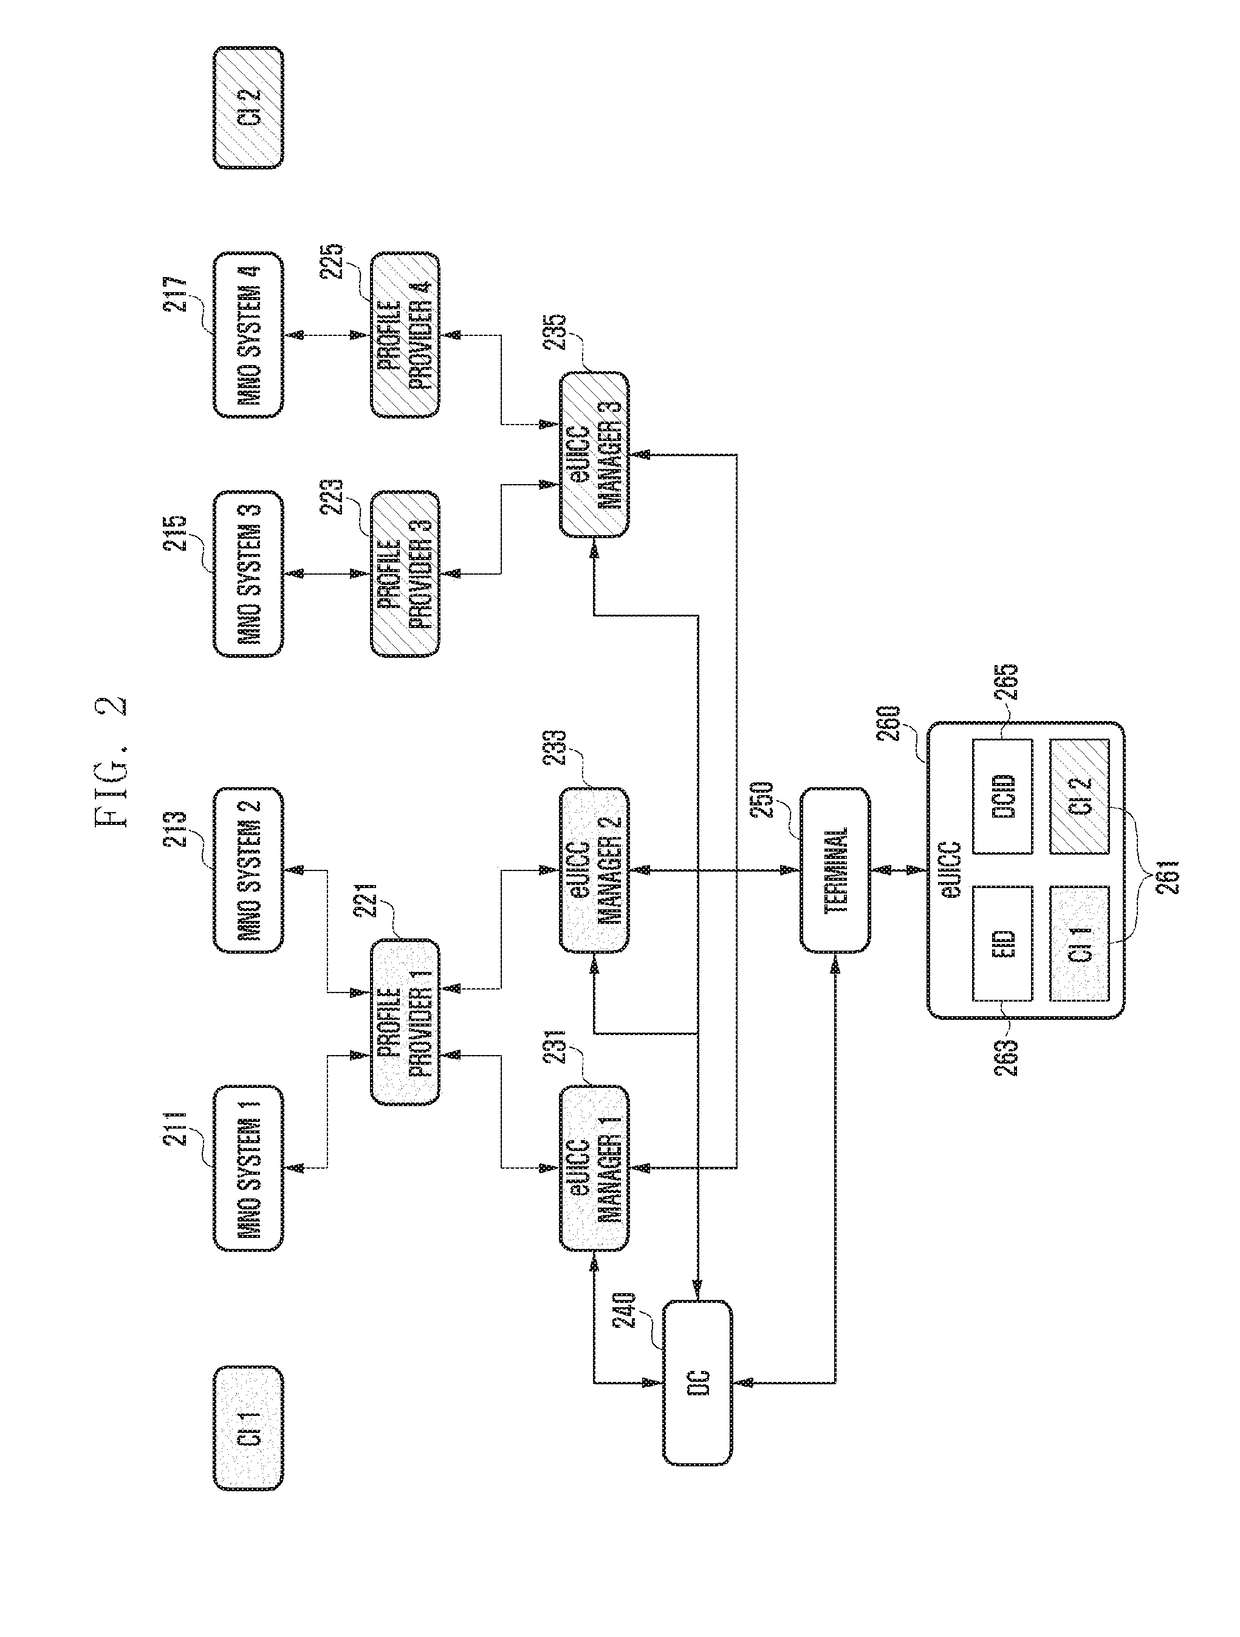 Method and apparatus for installing terminal profile in wireless communication system